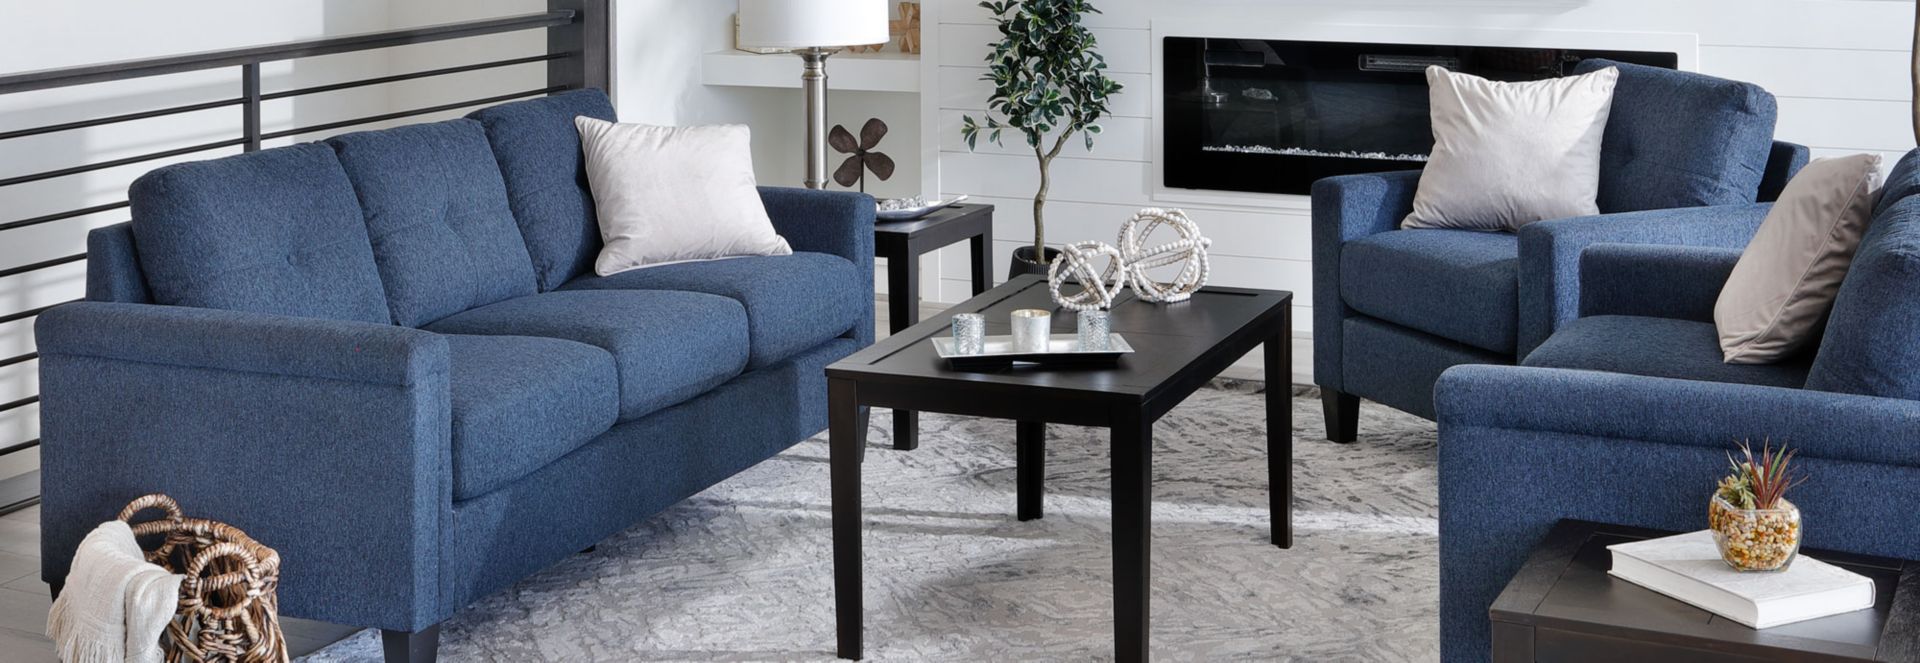 The Trinity Sofa Collection at Furniture Row